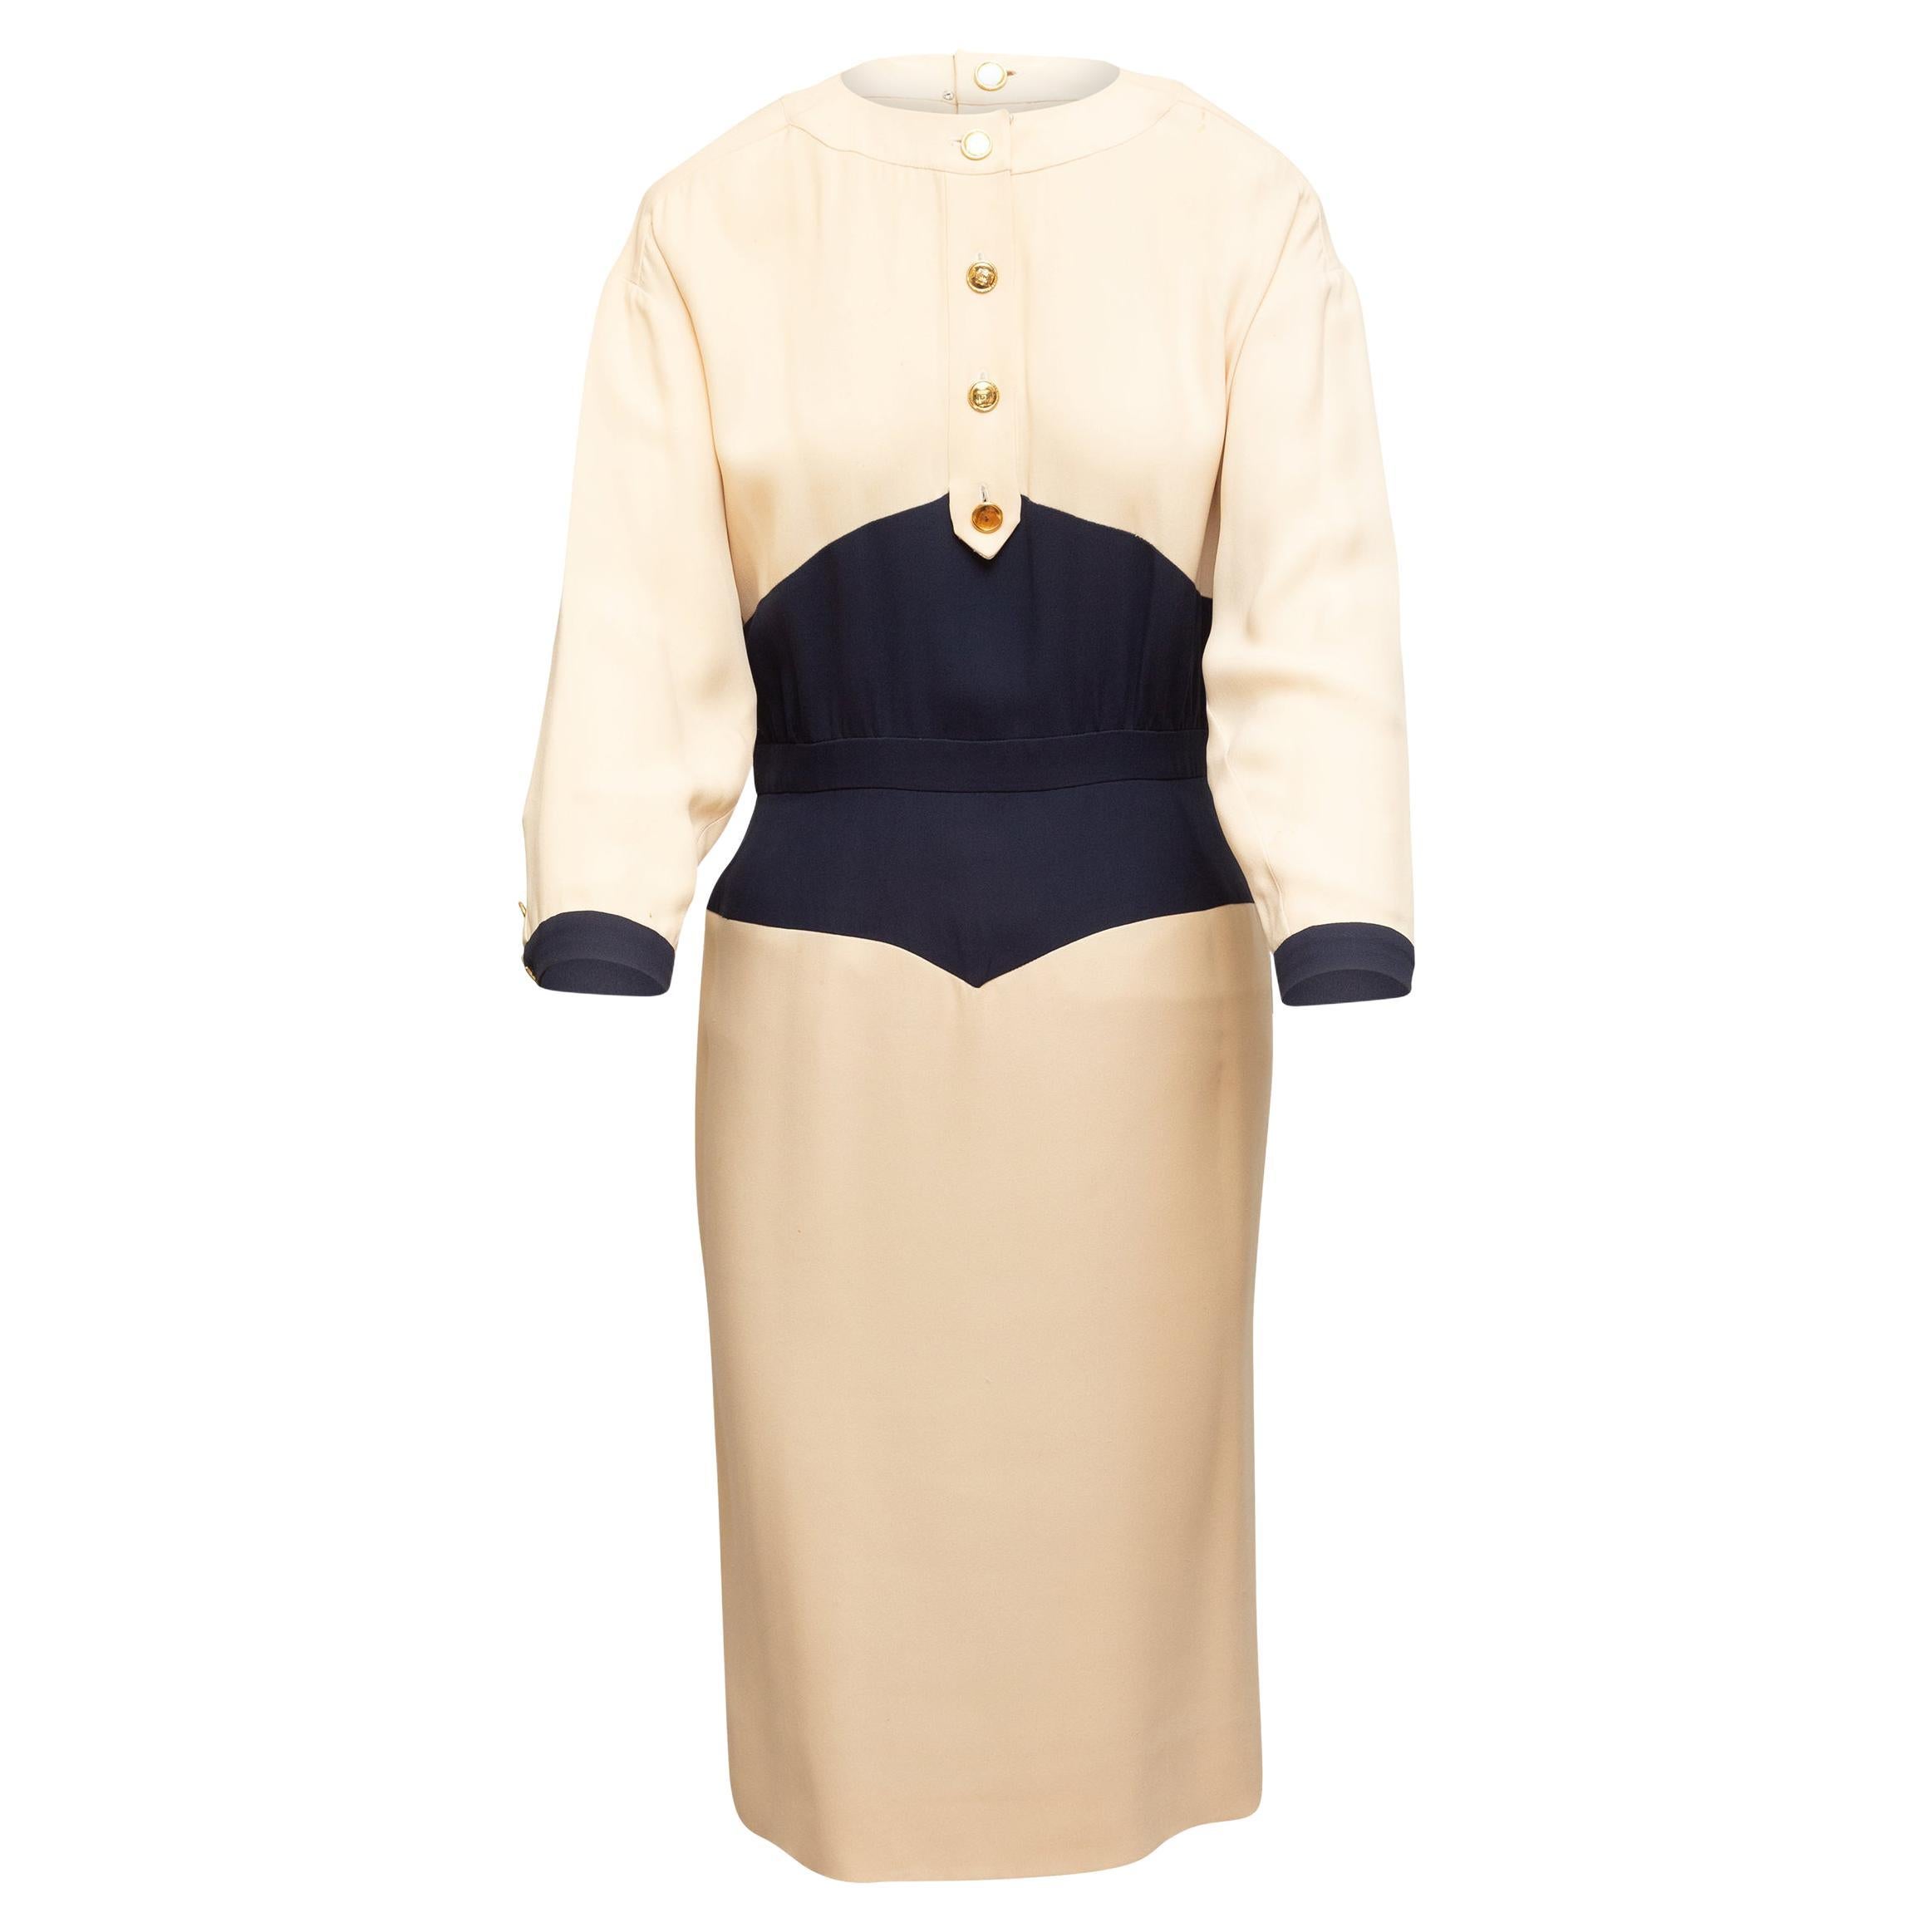 Chanel Cream & Navy Boutique Long Sleeve Dress